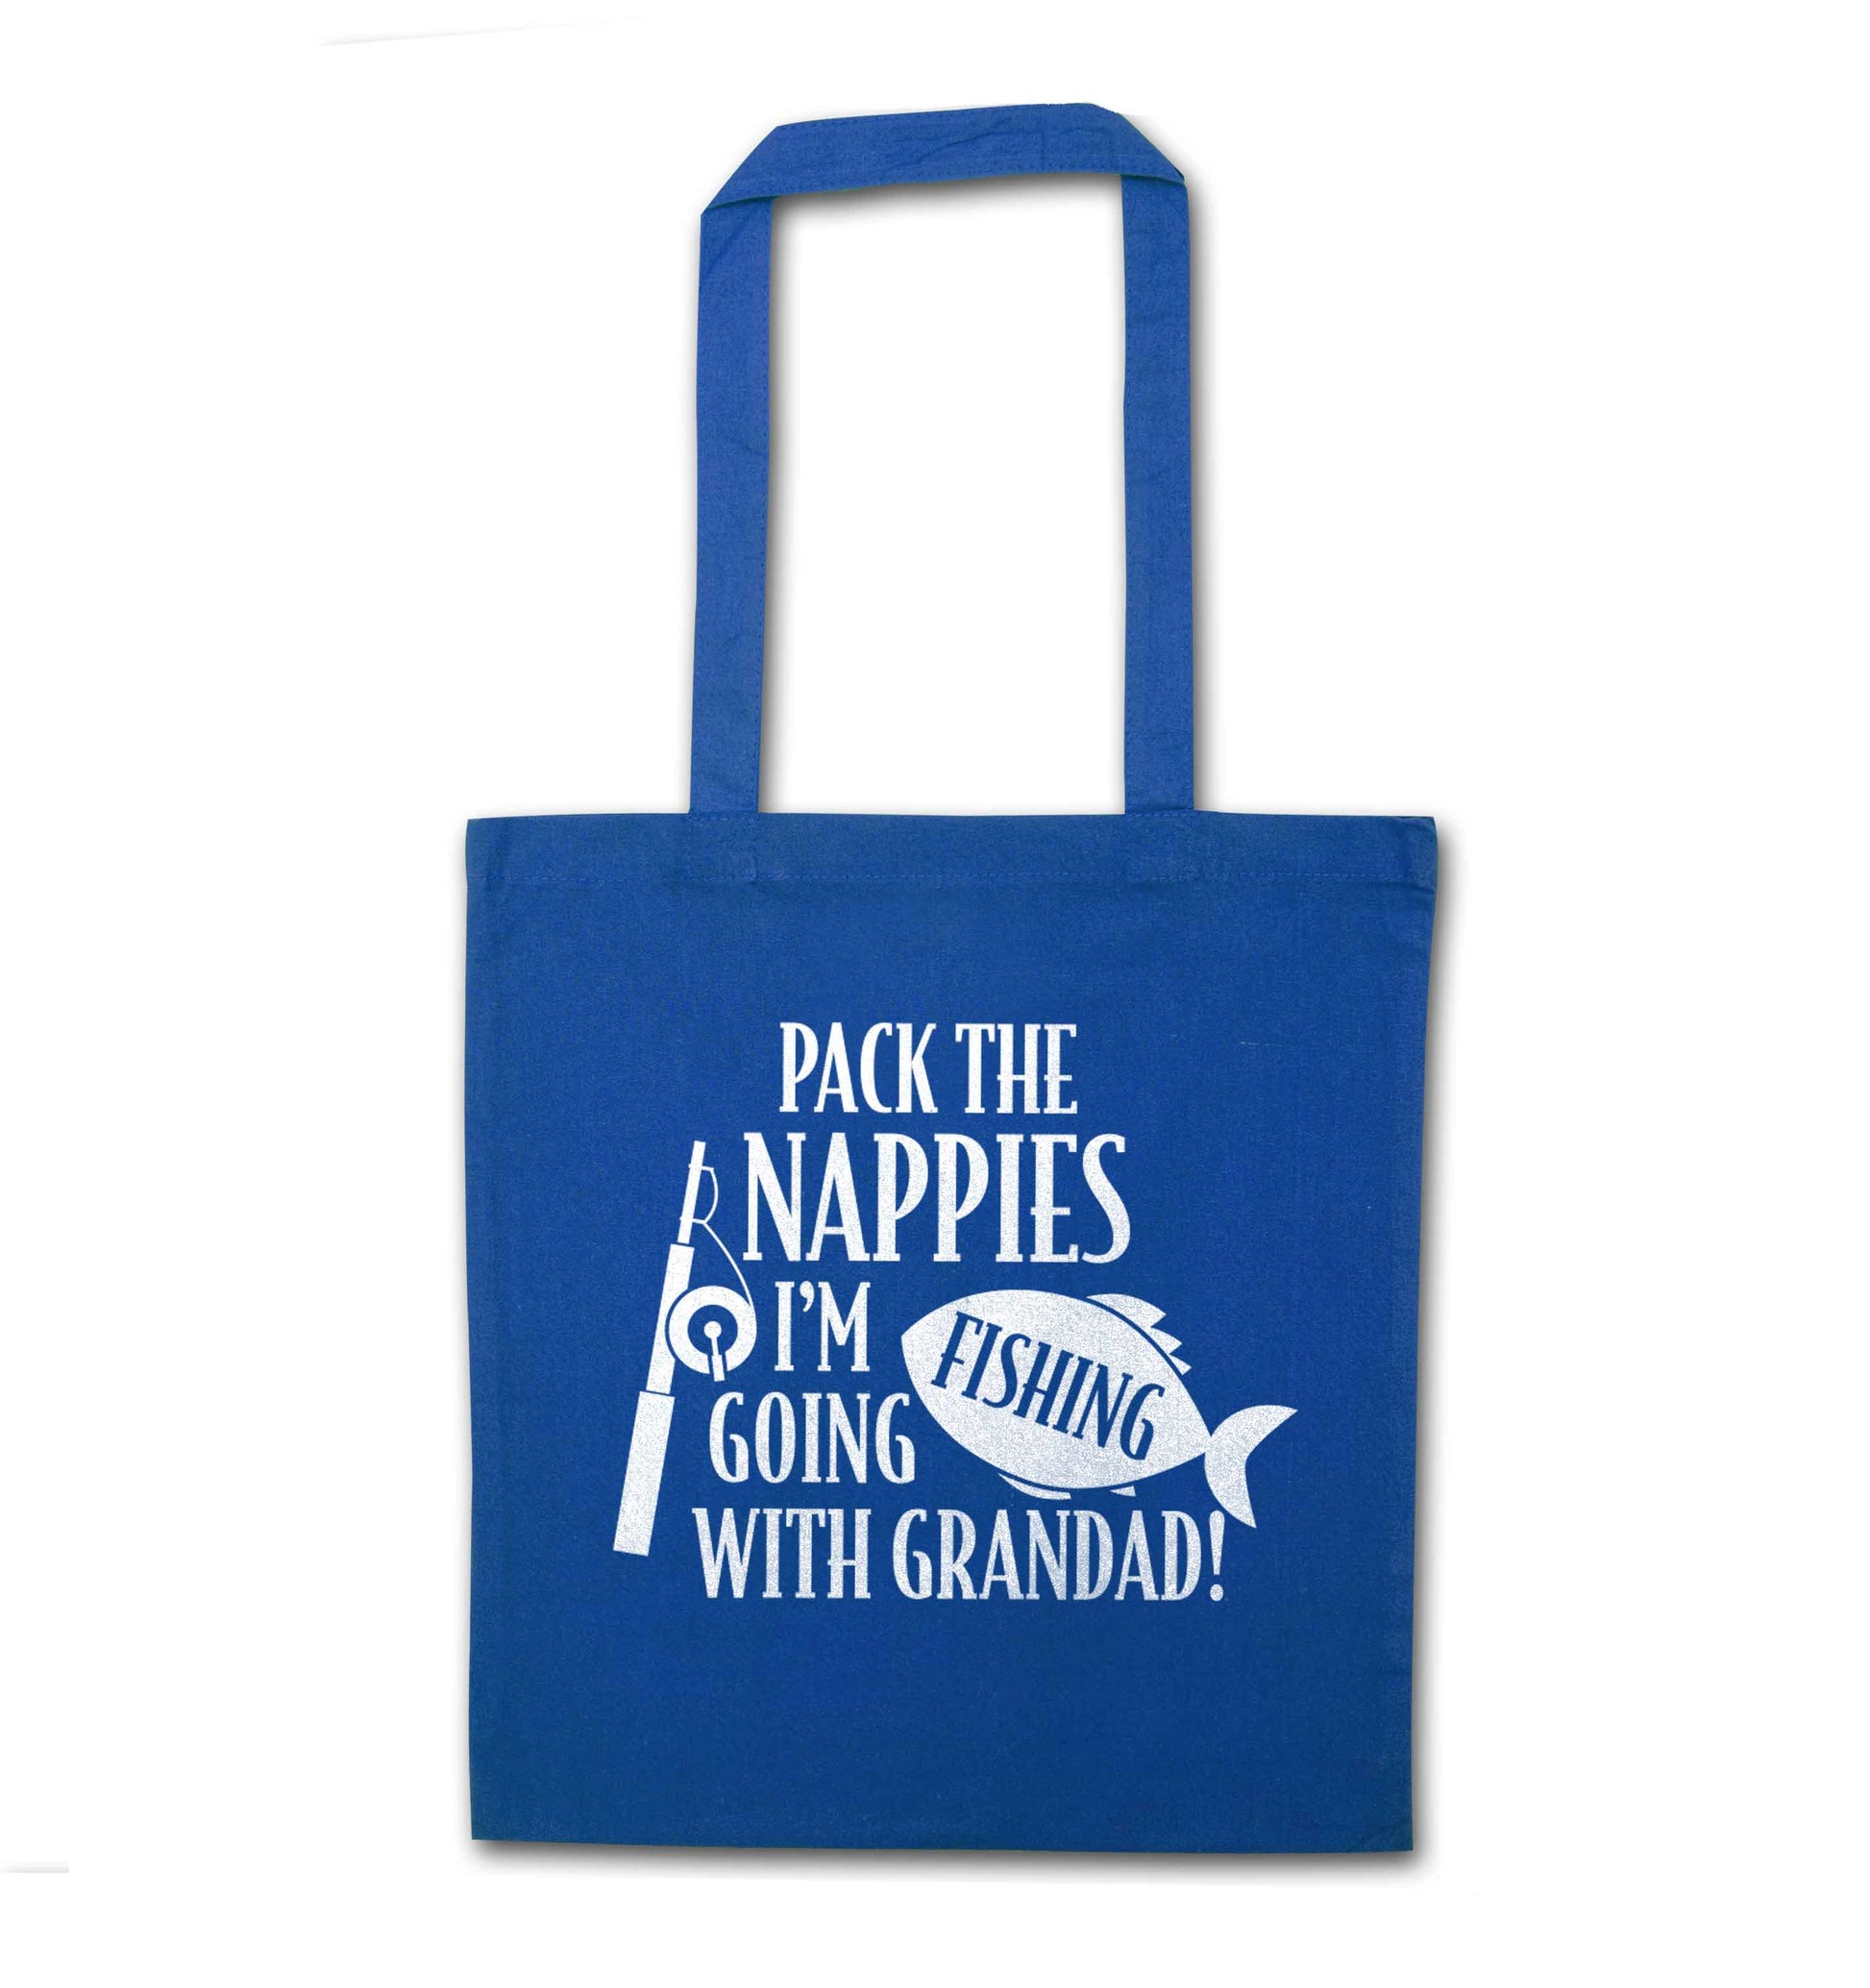 Pack the nappies I'm going fishing with Grandad blue tote bag